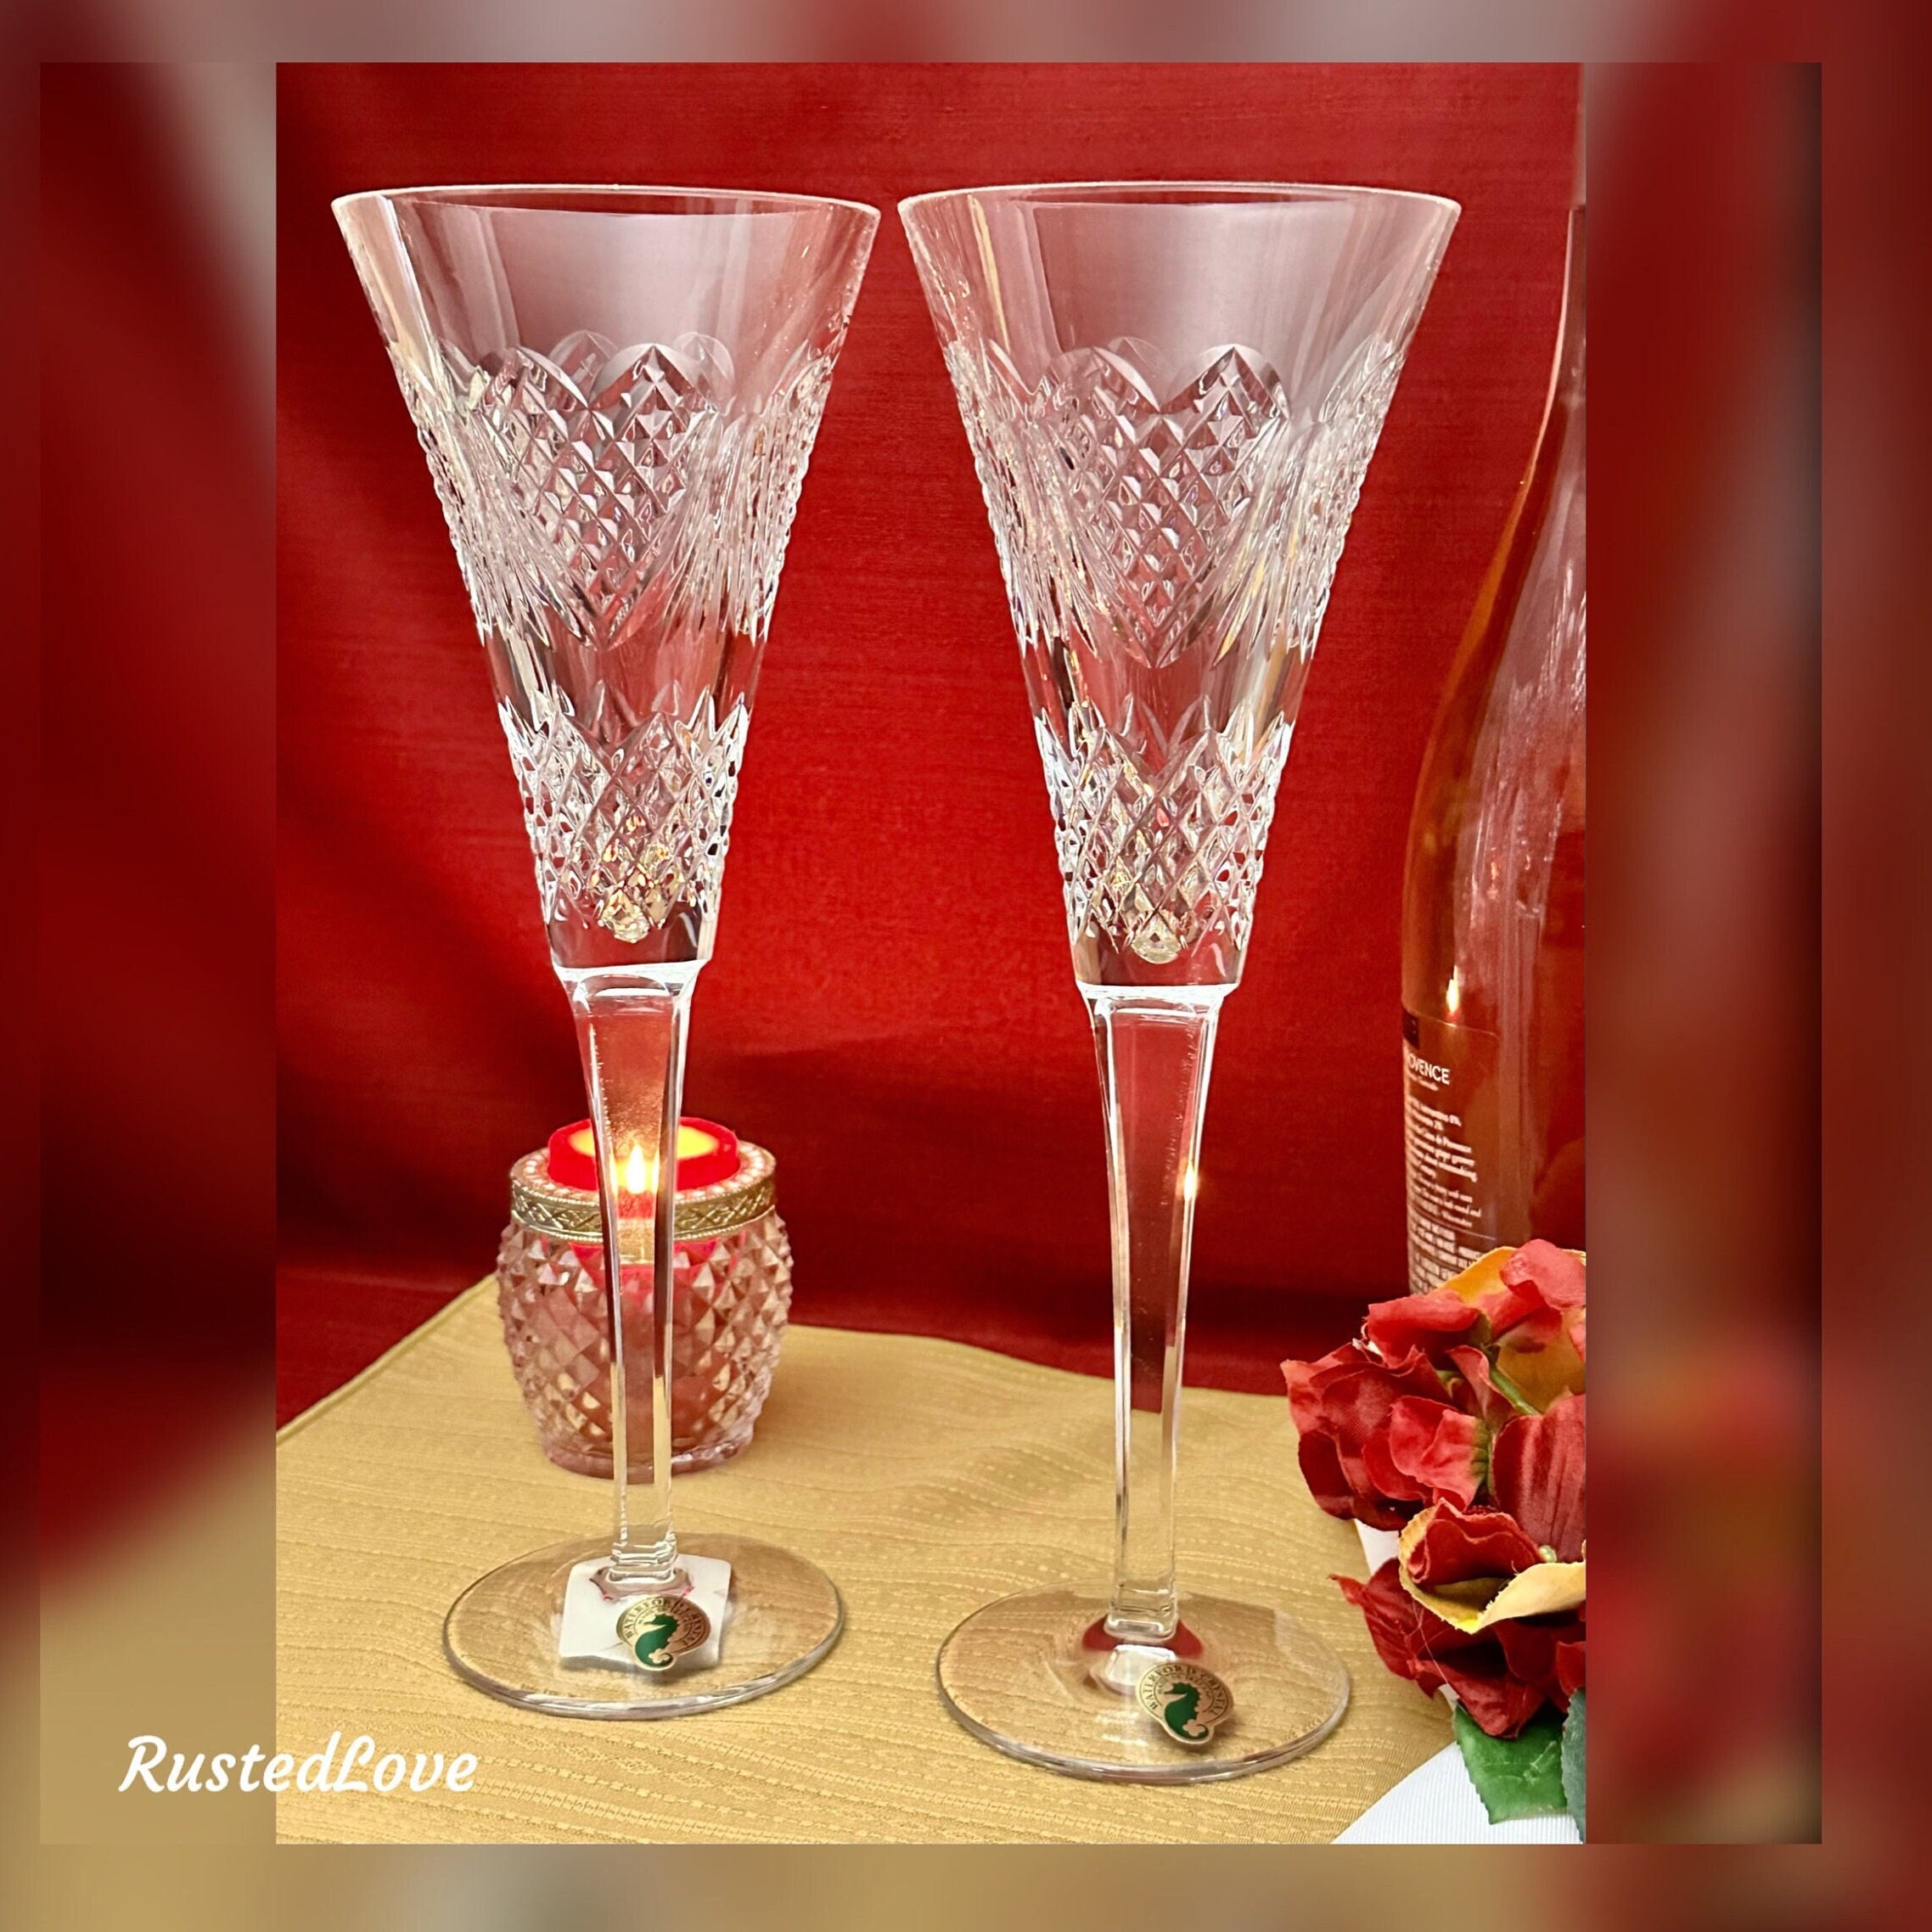 Waterford Crystal Champagne Glasses / Toasting Champagne Flutes / Waterford  Heirloom Champagne Glasses / Wedding Hearts Glasses / Pair -  Israel